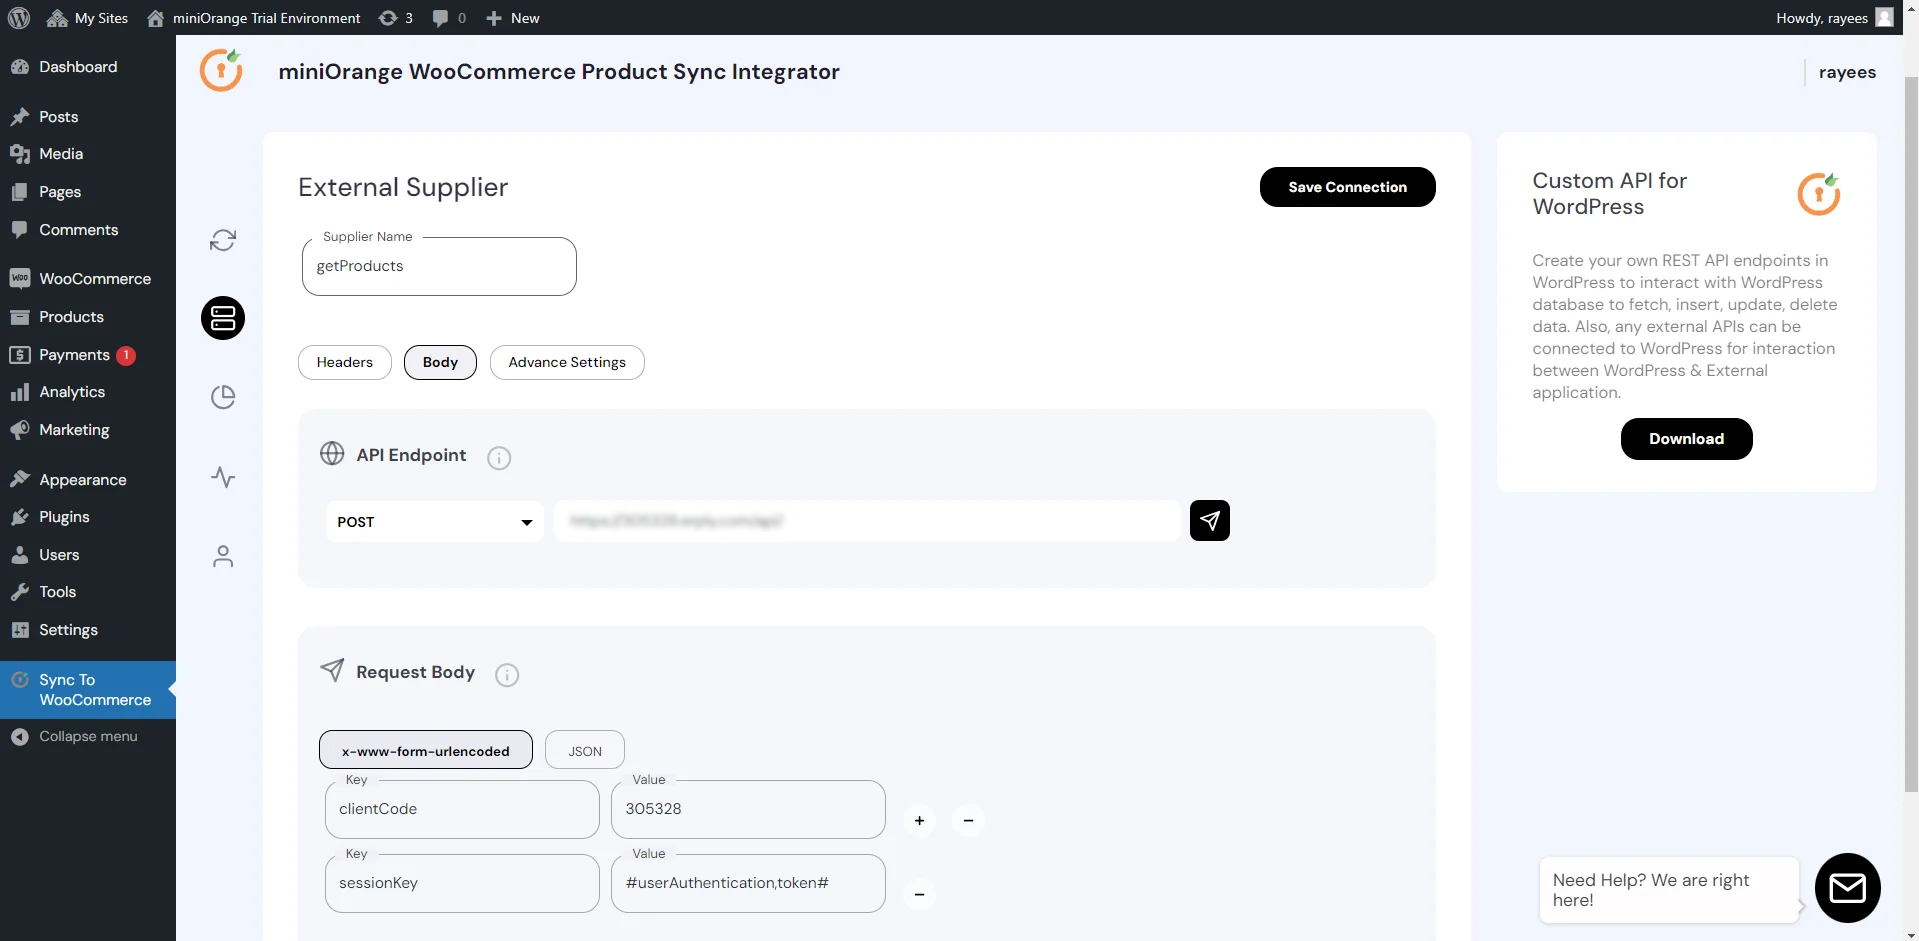 Configure WooCommerce Product Sync - Request body data